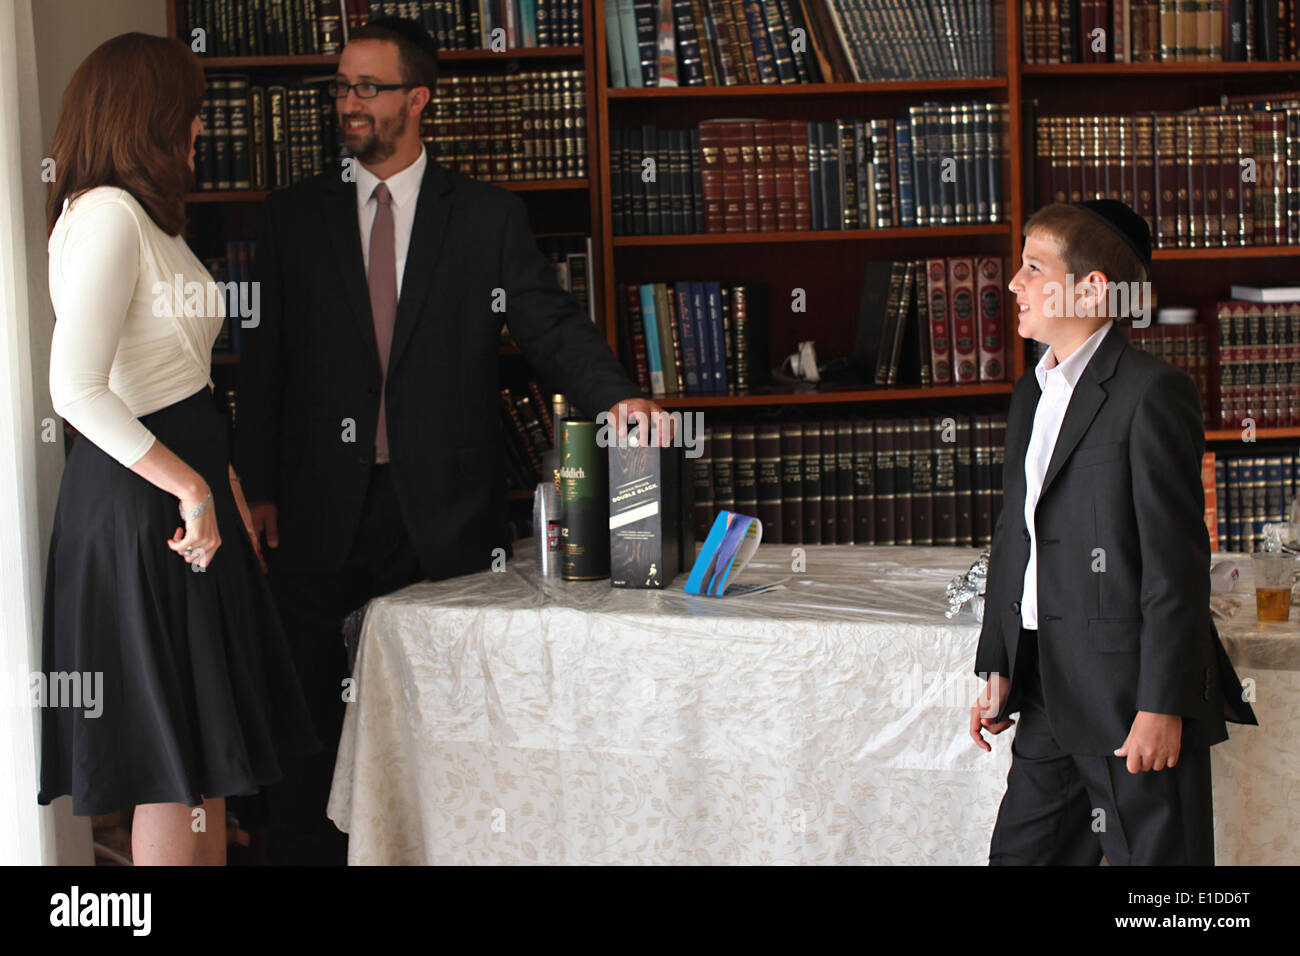 (140601) -- JERUSALEM, June 1, 2014 (Xinhua) -- Tzviel Noyman is seen with his parents at their home in Beit Shemesh, about 20 km from Jerusalem, on May 30, 2014. Tzviel Noyman is an Israeli Ultra-Orthodox boy in a family with six children, three boys and three girls. He is ten years old this year and a grade three pupil of Torat Moshe elementary school, which is only opened to Jewish children. Tzviel has eight classes each day, including Hebrew, English, mathematics and Jewish religion, which has four classes each day including Talmud, Mishnah and Gemara. Tzviel likes the religion class best Stock Photo